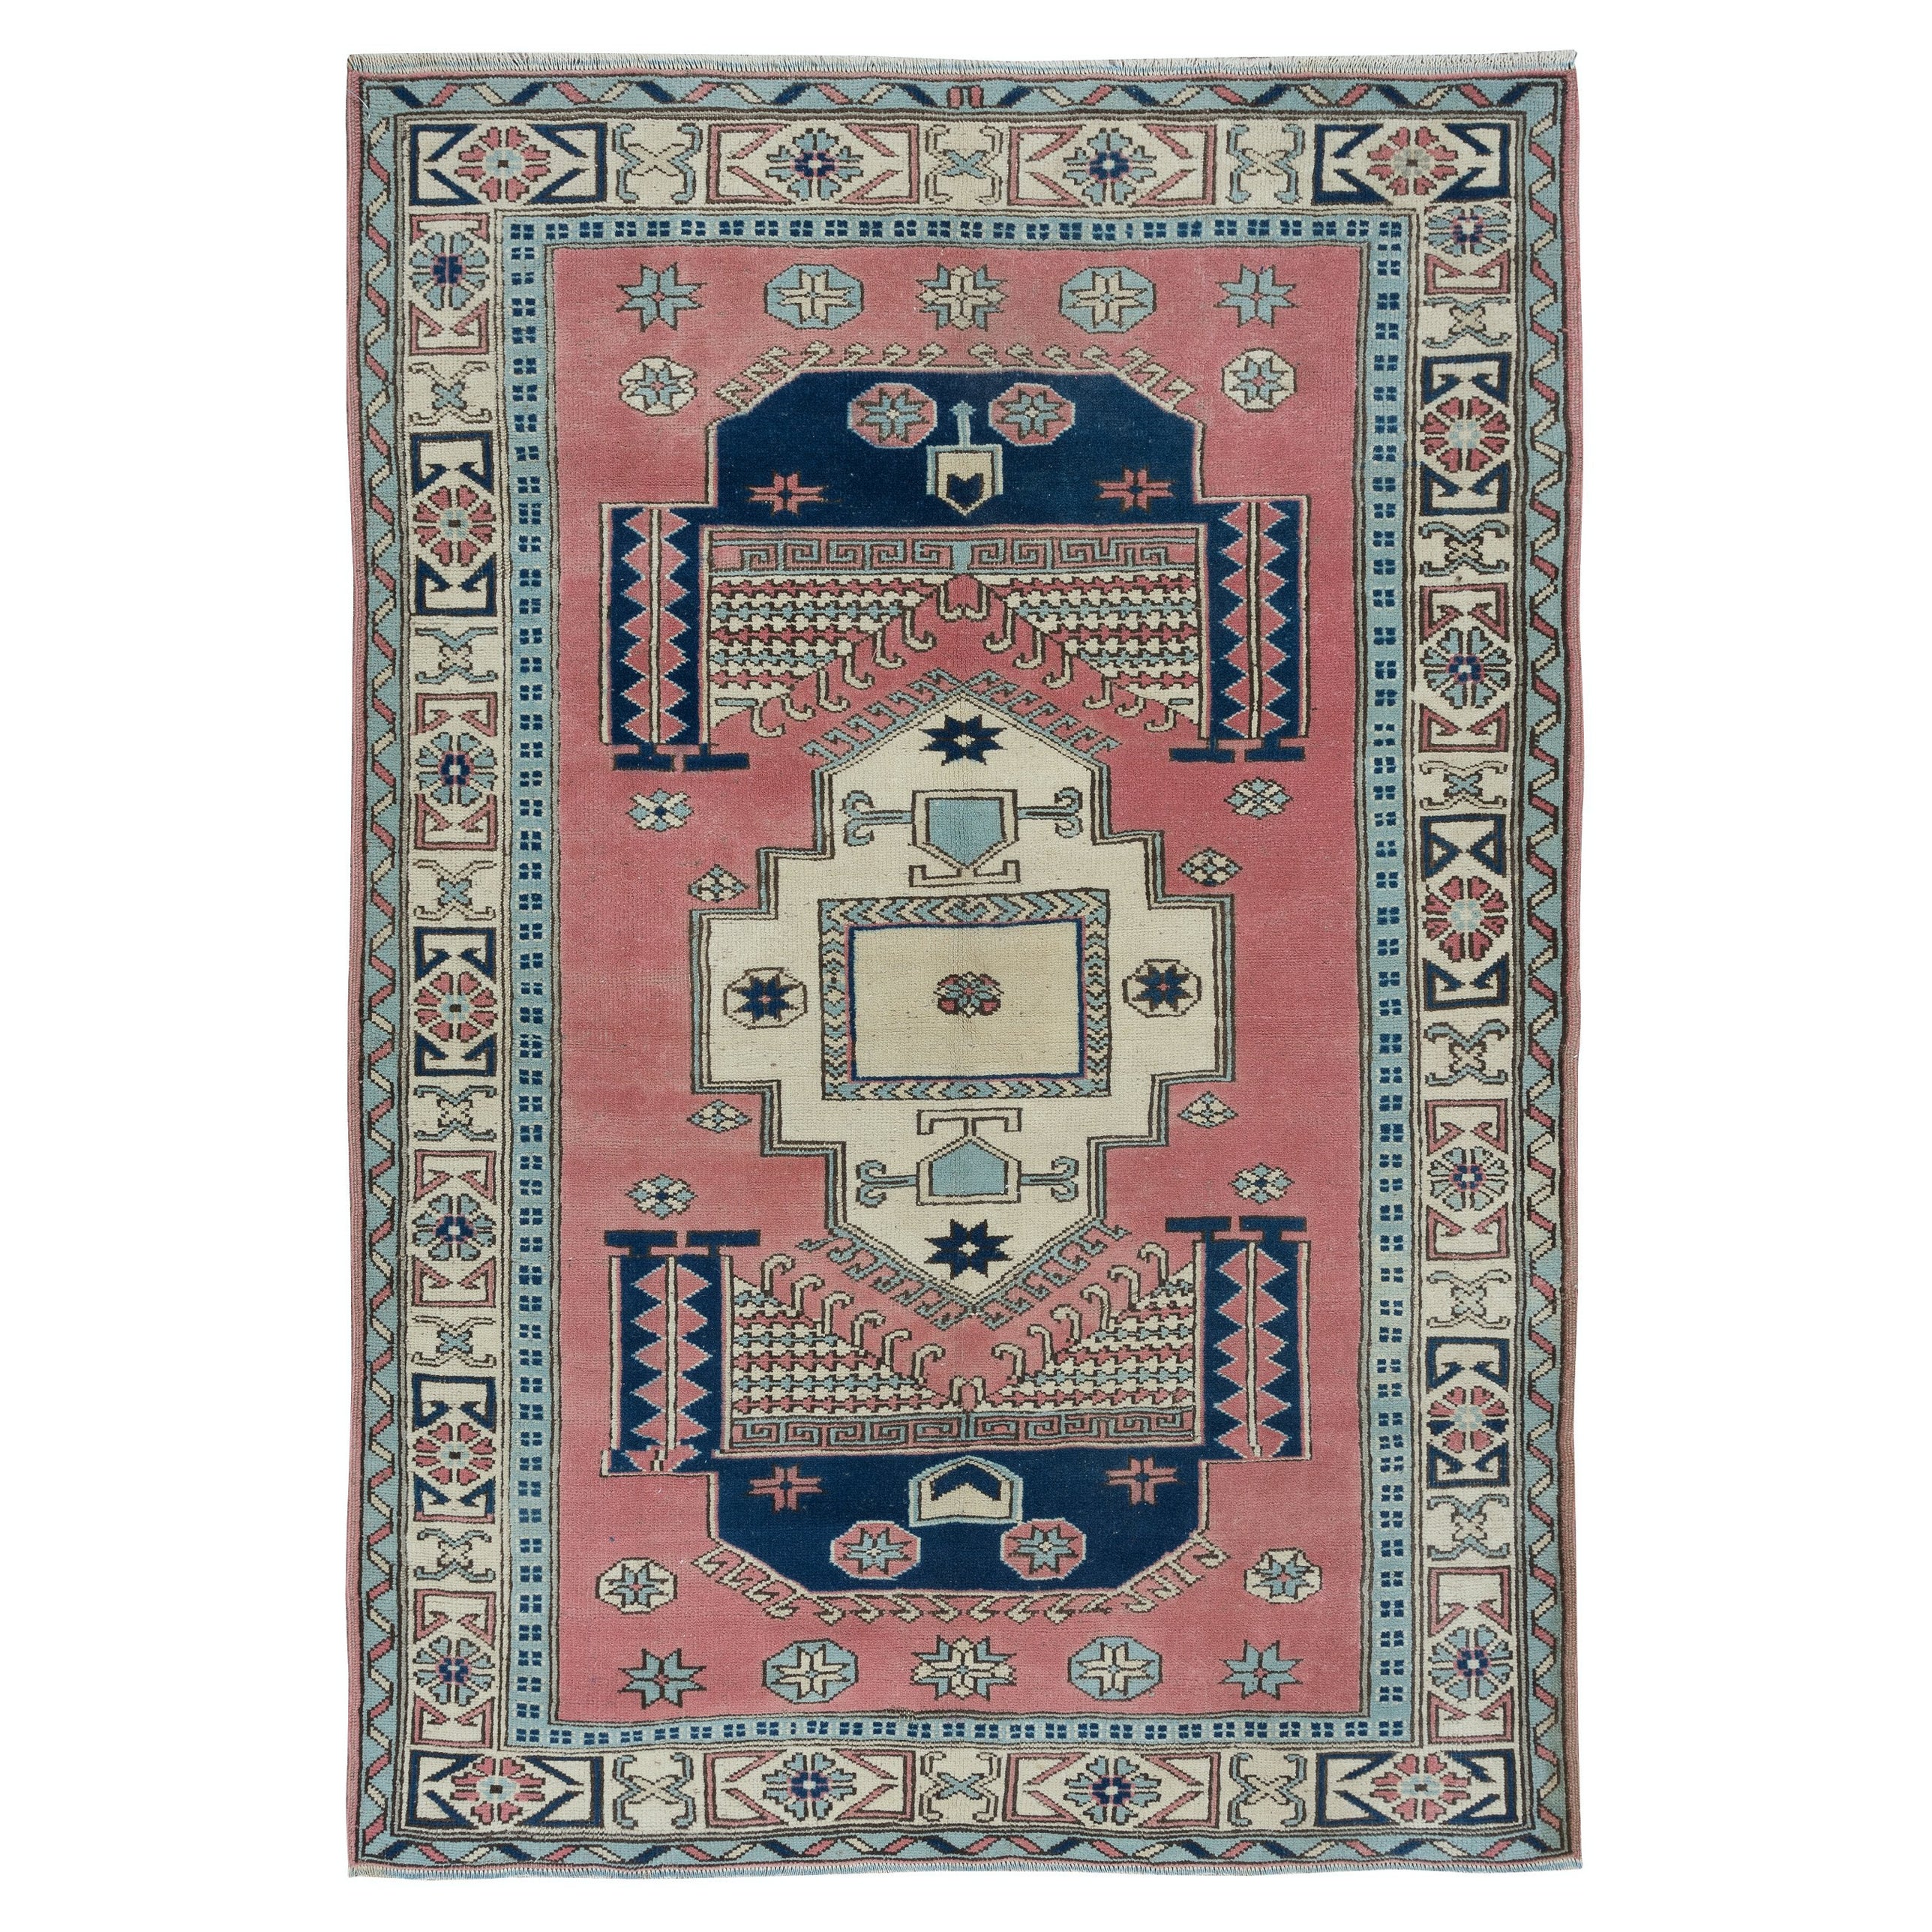 4.6x6.4 Ft Unique Vintage Handmade Turkish Wool Rug with Geometric Patters